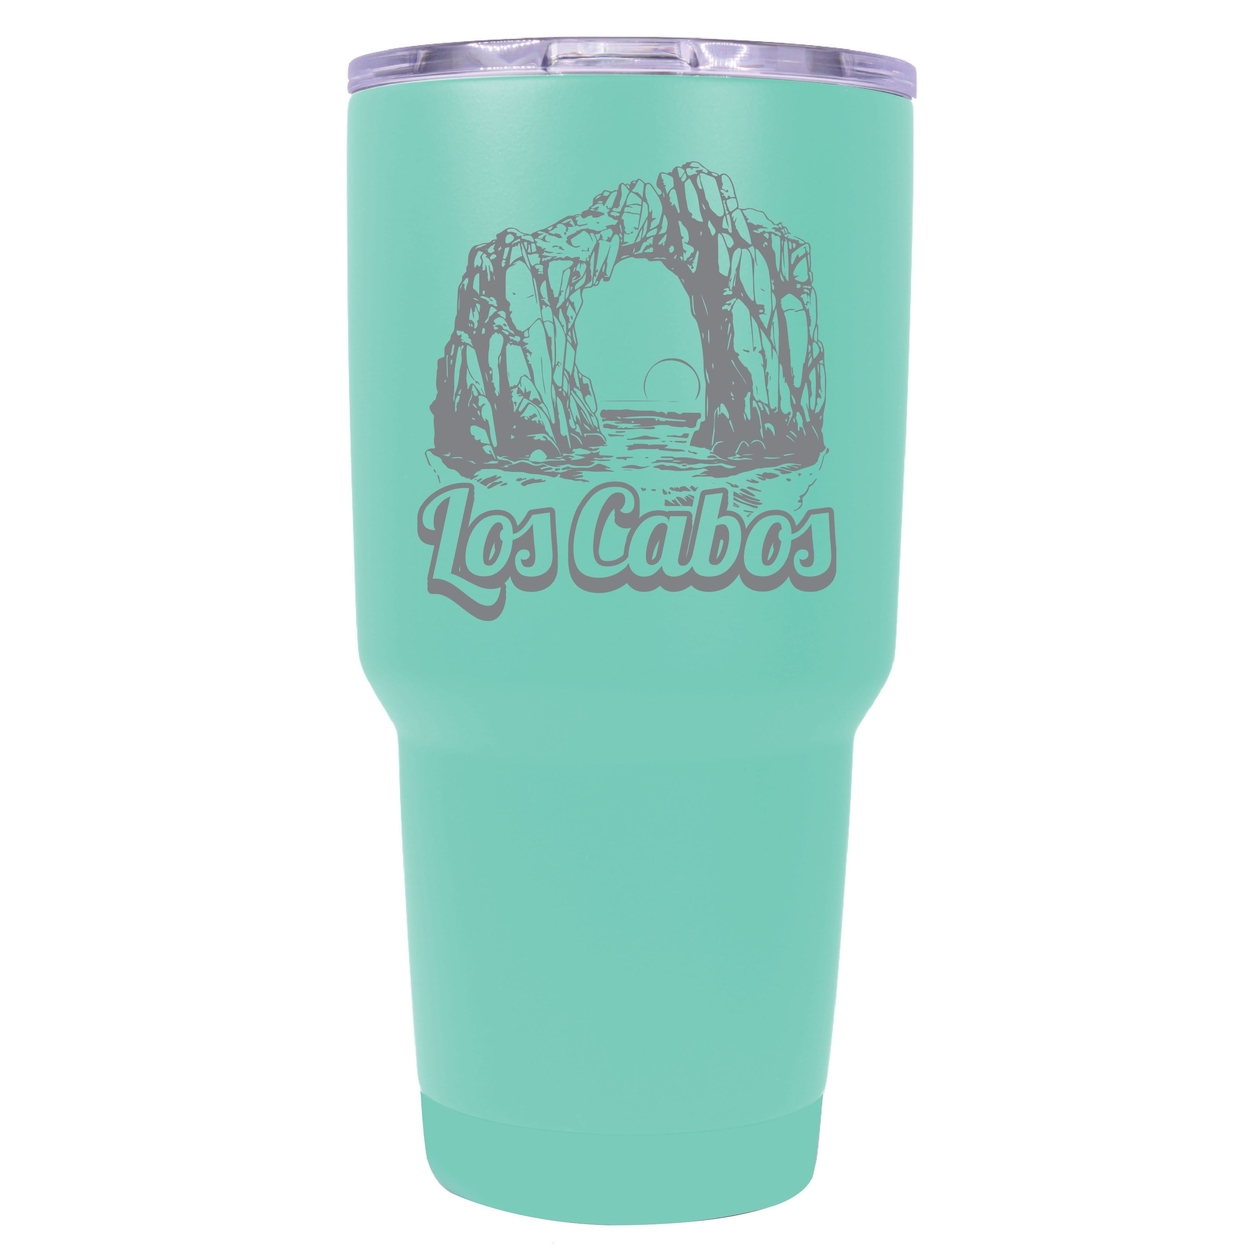 Los Cabos Mexico Souvenir 24 Oz Engraved Insulated Stainless Steel Tumbler - Seafoam,,Single Unit